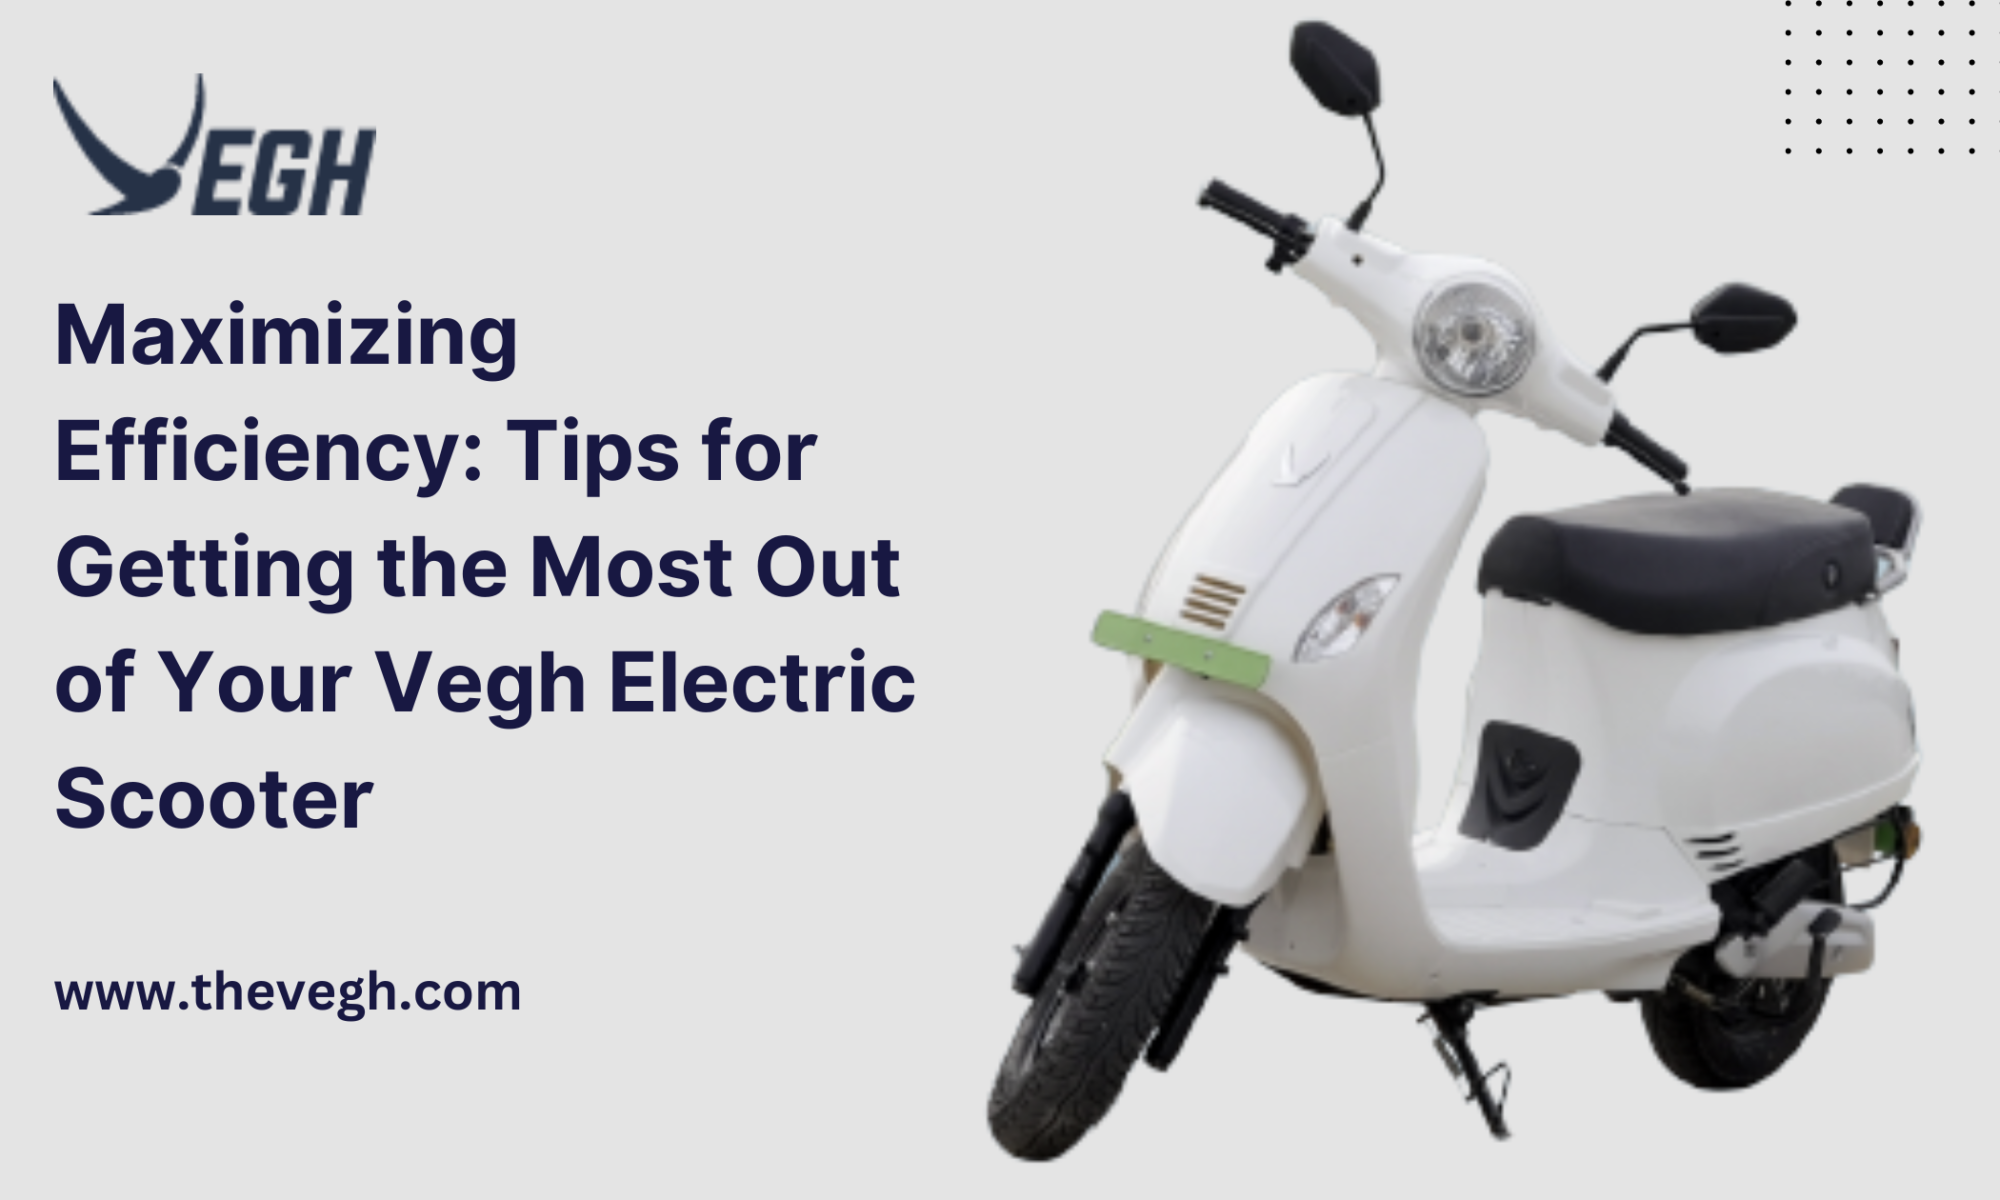 Maximizing Efficiency: Tips for Getting the Most Out of Your Vegh Electric Scooter